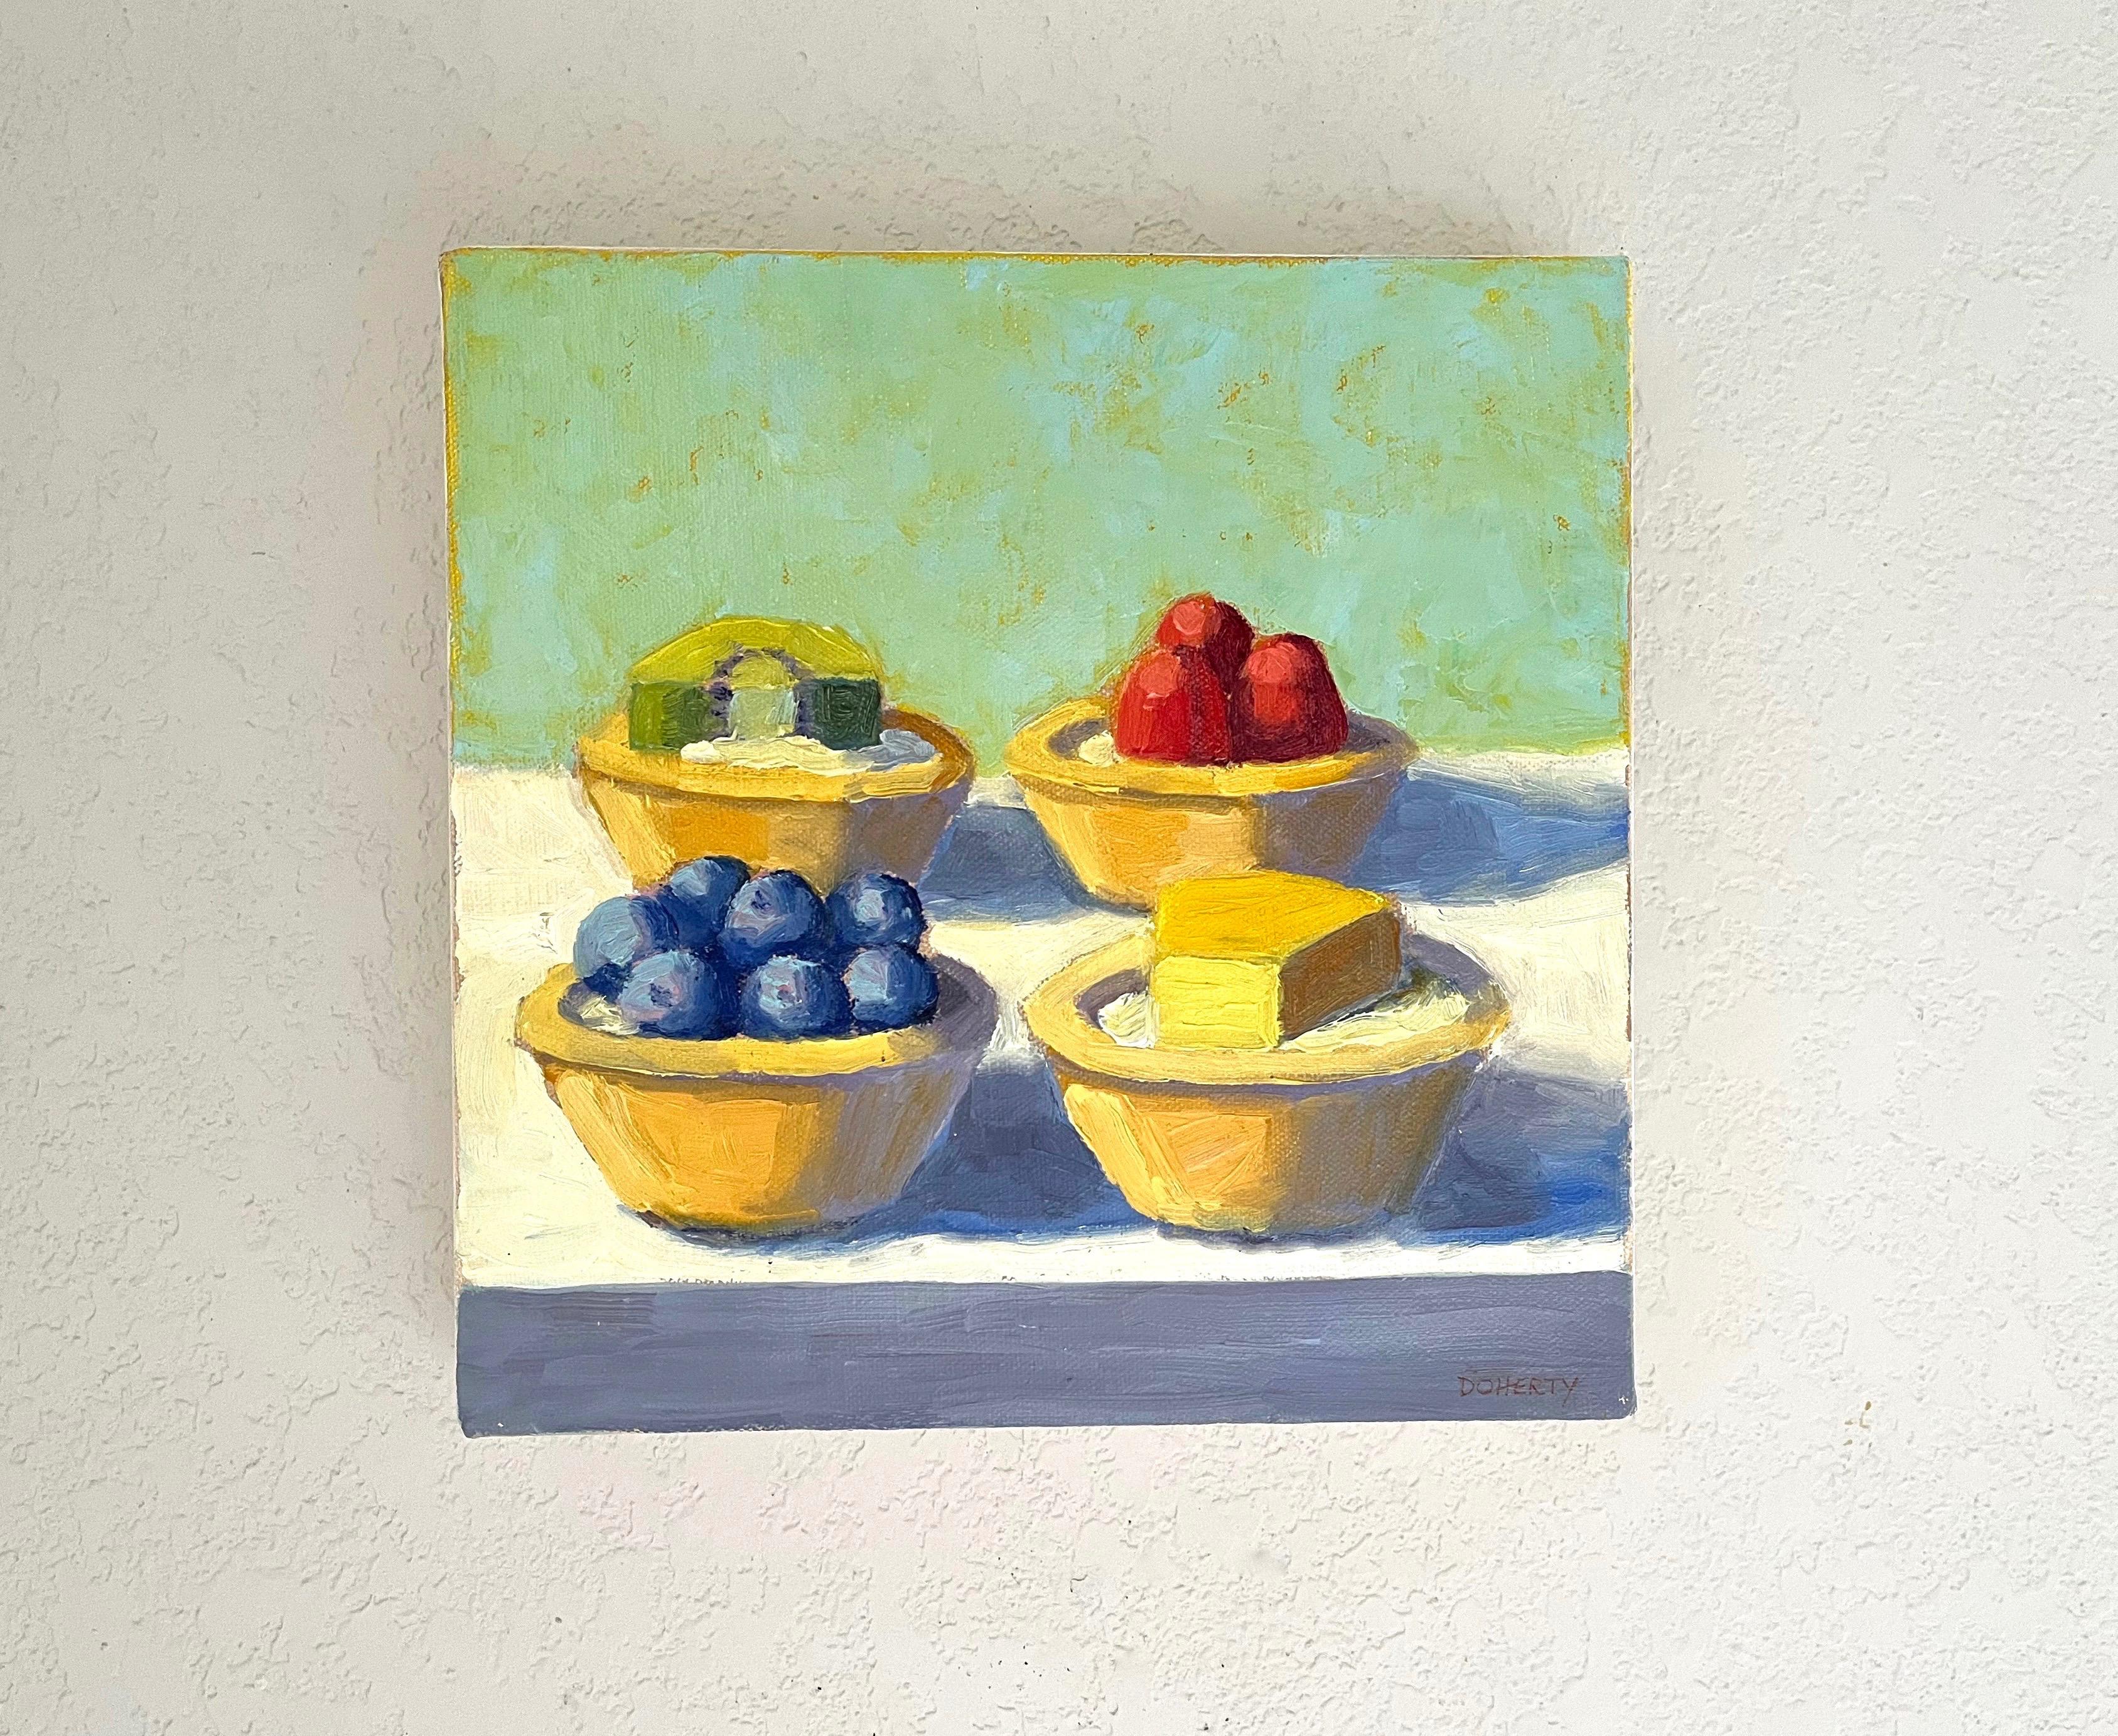 <p>Artist Comments<br />Artist Pat Doherty presents an assortment of four mini fruit tartsâ€”blueberry, kiwi, raspberry, and pineapple in a balanced arrangement. Her delectable oil paintings draw on her experience as a former commercial art director